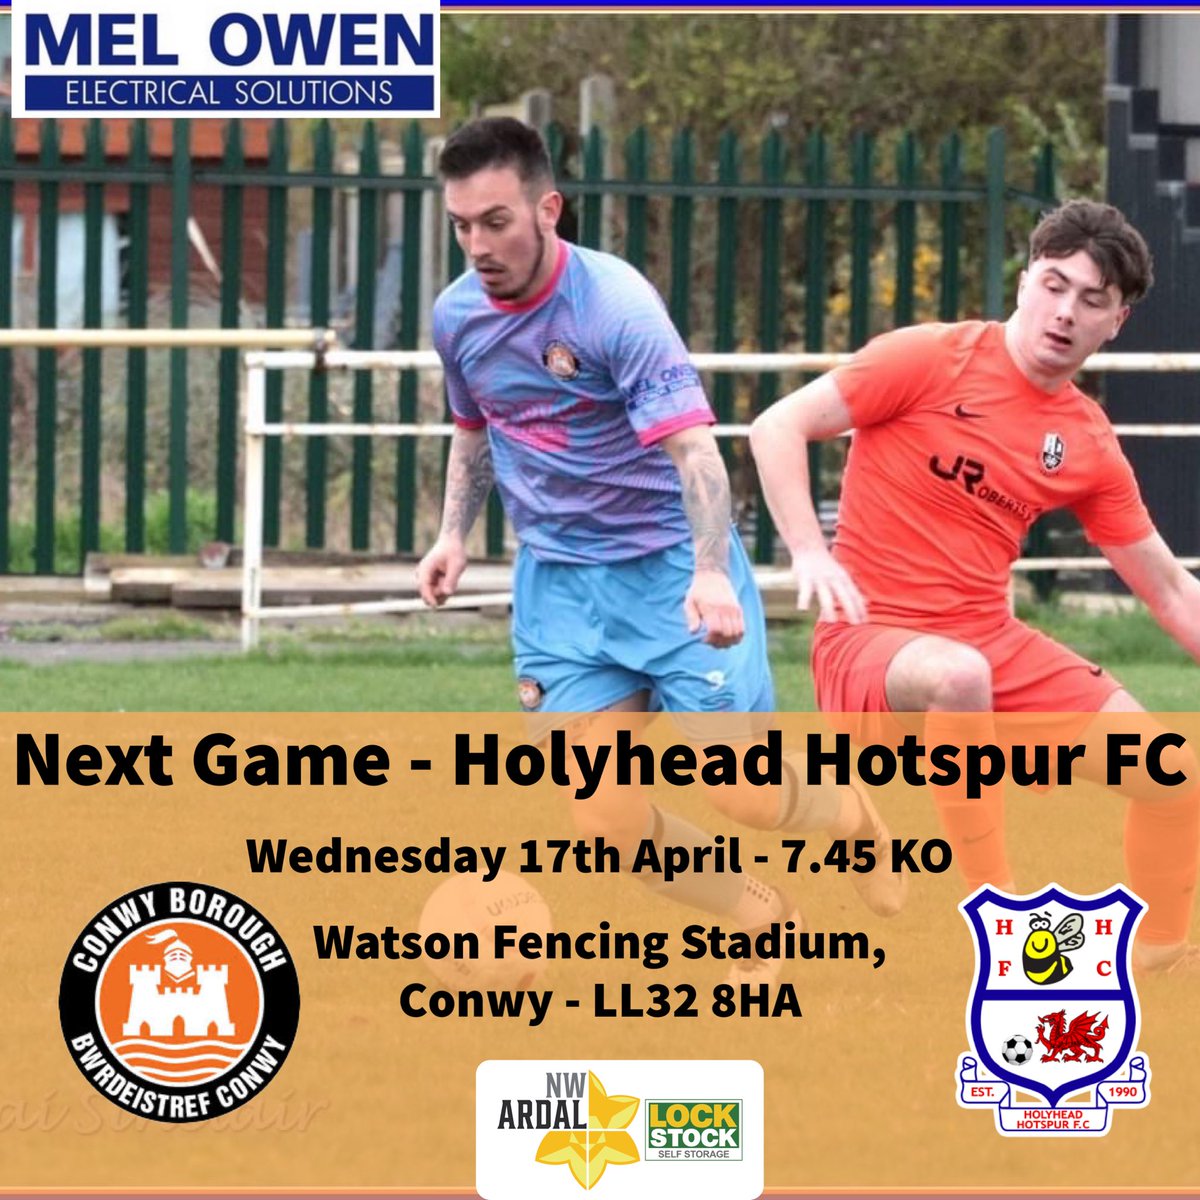 Next Fixture ➡️ 🆚 Holyhead Hotspur FC 🗓️ 17/04 🕰️ 7.45 kick off 📍 Watson Fencing Stadium, Conwy - LL32 8HA We entertain an in-form Holyhead side this Wednesday. The lads will be looking to bounce back from the weekend’s disappointment - come down and support the lads 🧡🍊